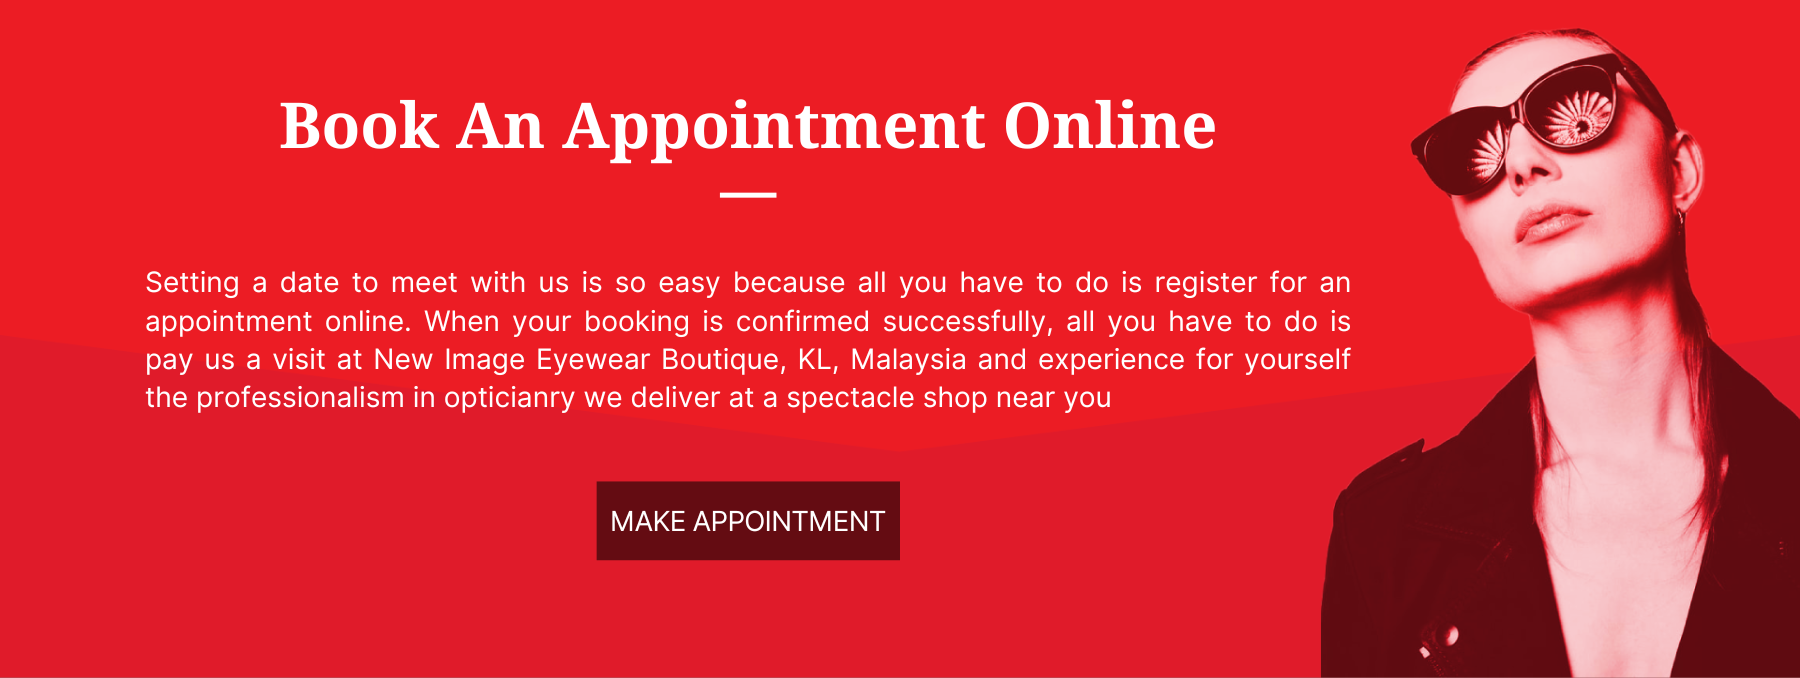 Register for an Appointment Online